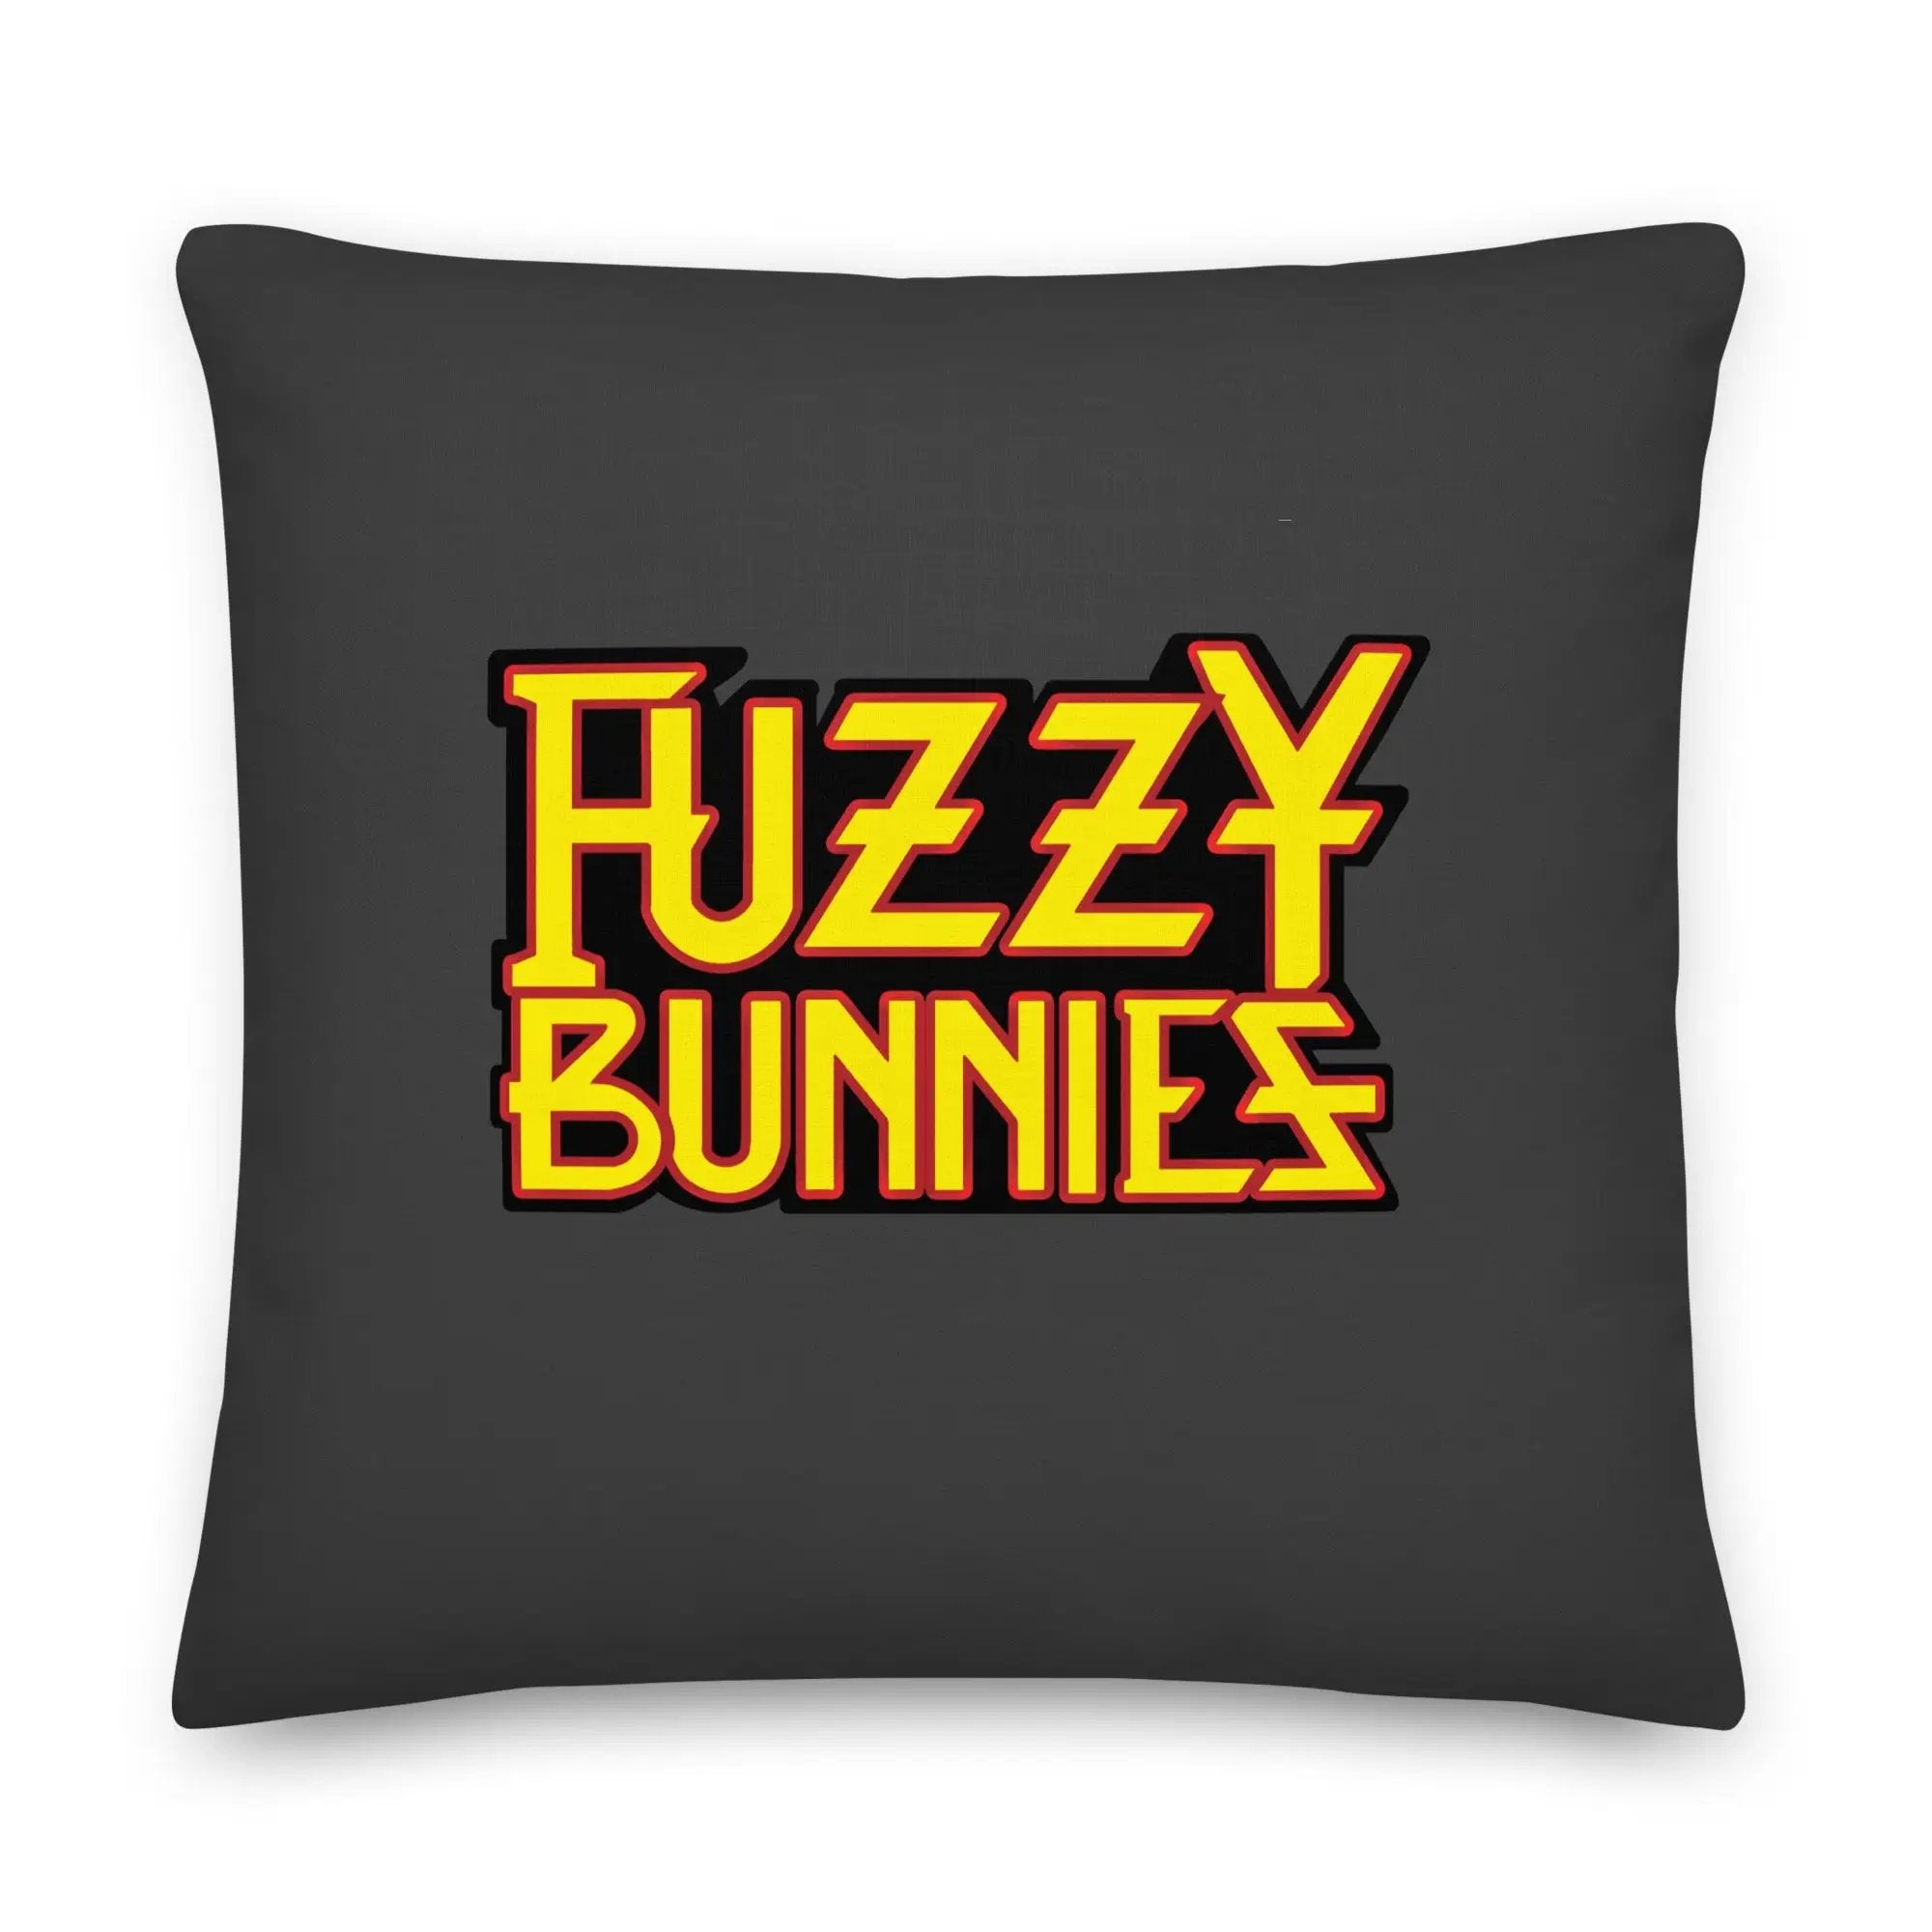 Black pillow with Fuzzy Bunnies